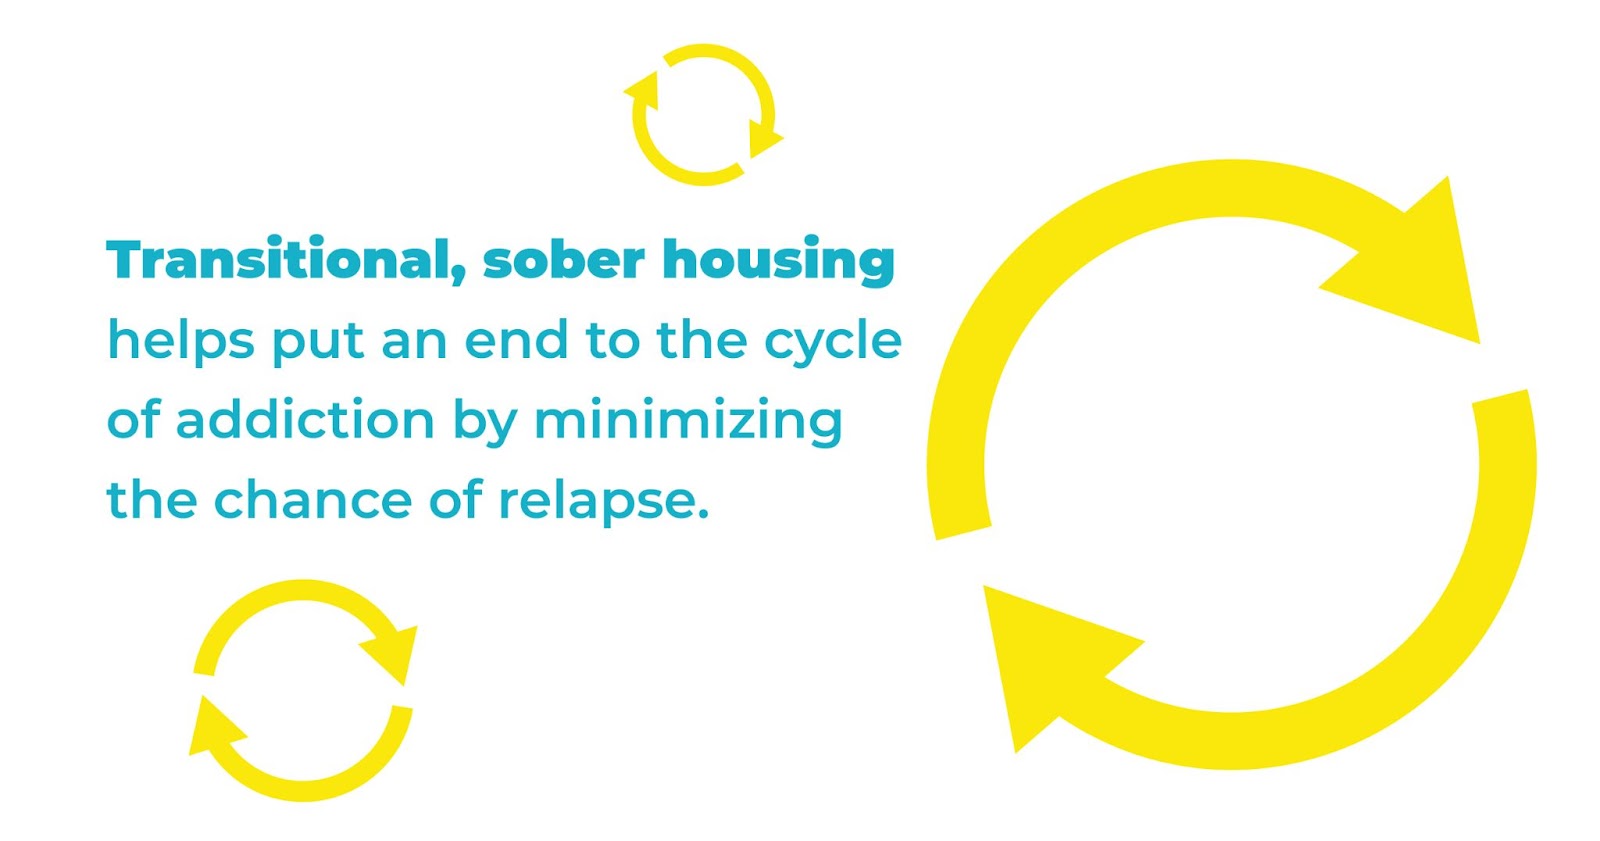 transitional sober housing helps put and end to the cycle of addiction by minimizing the chance of relapse